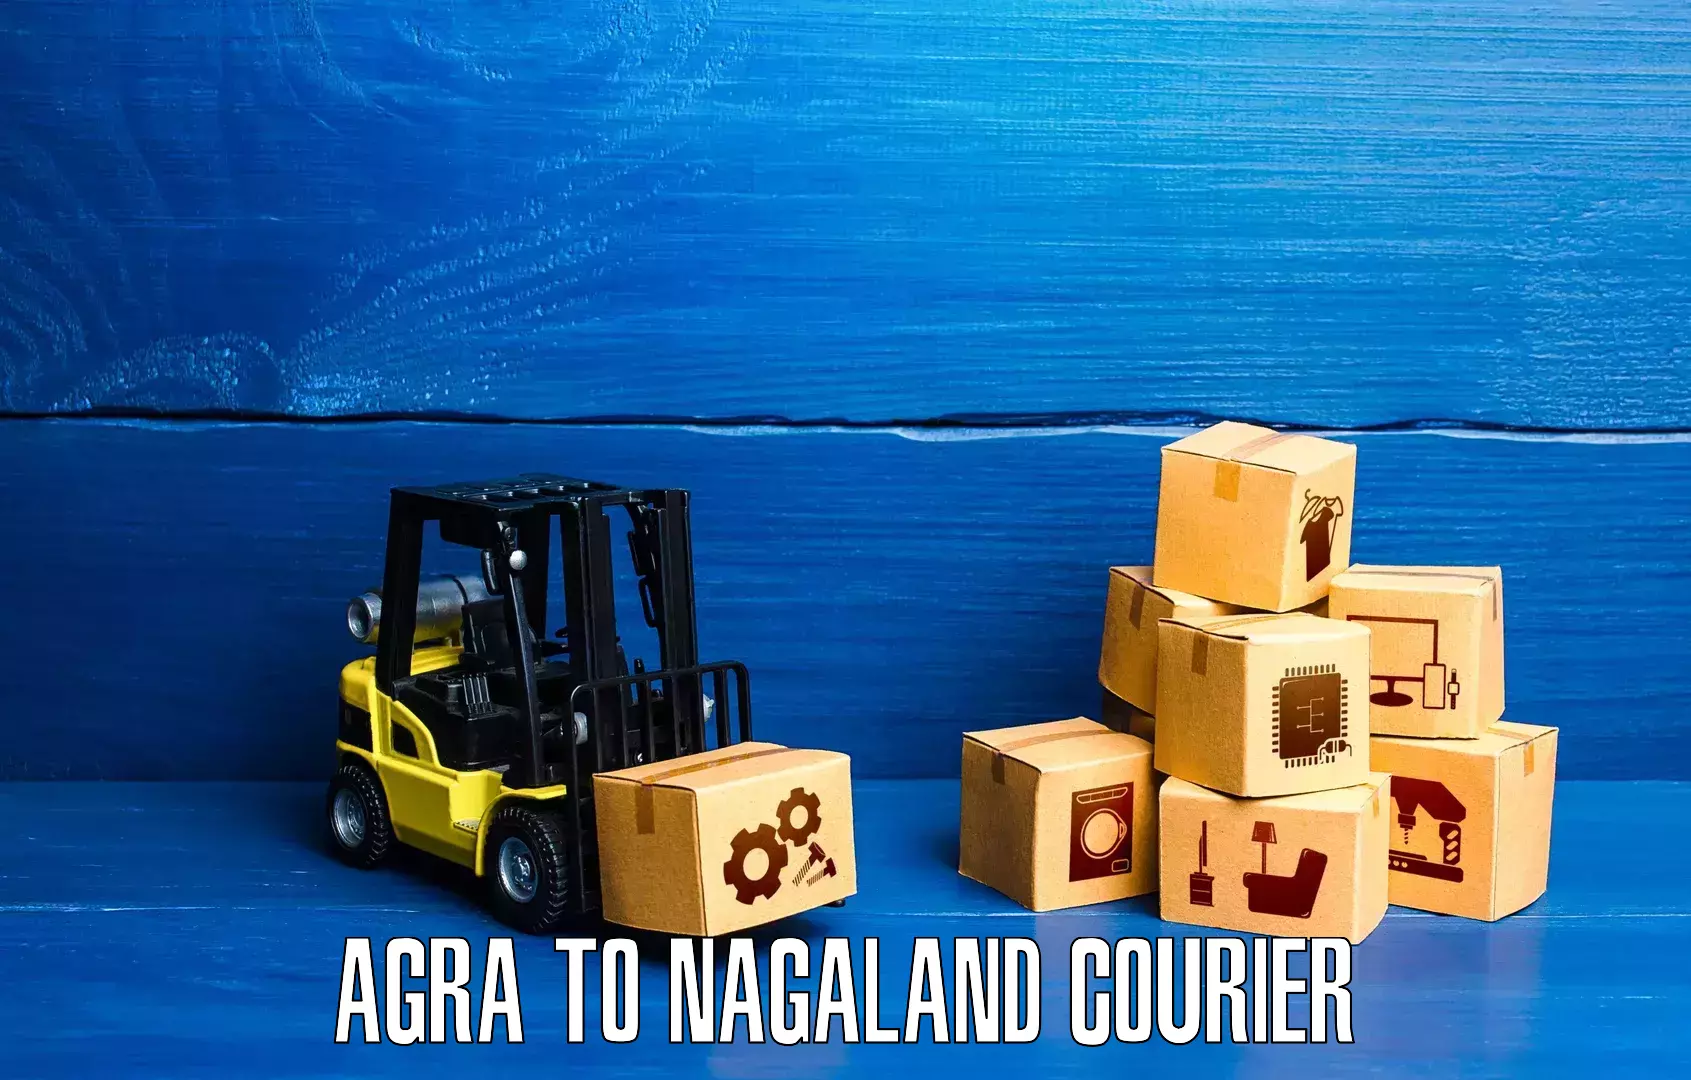 Flexible parcel services Agra to Nagaland